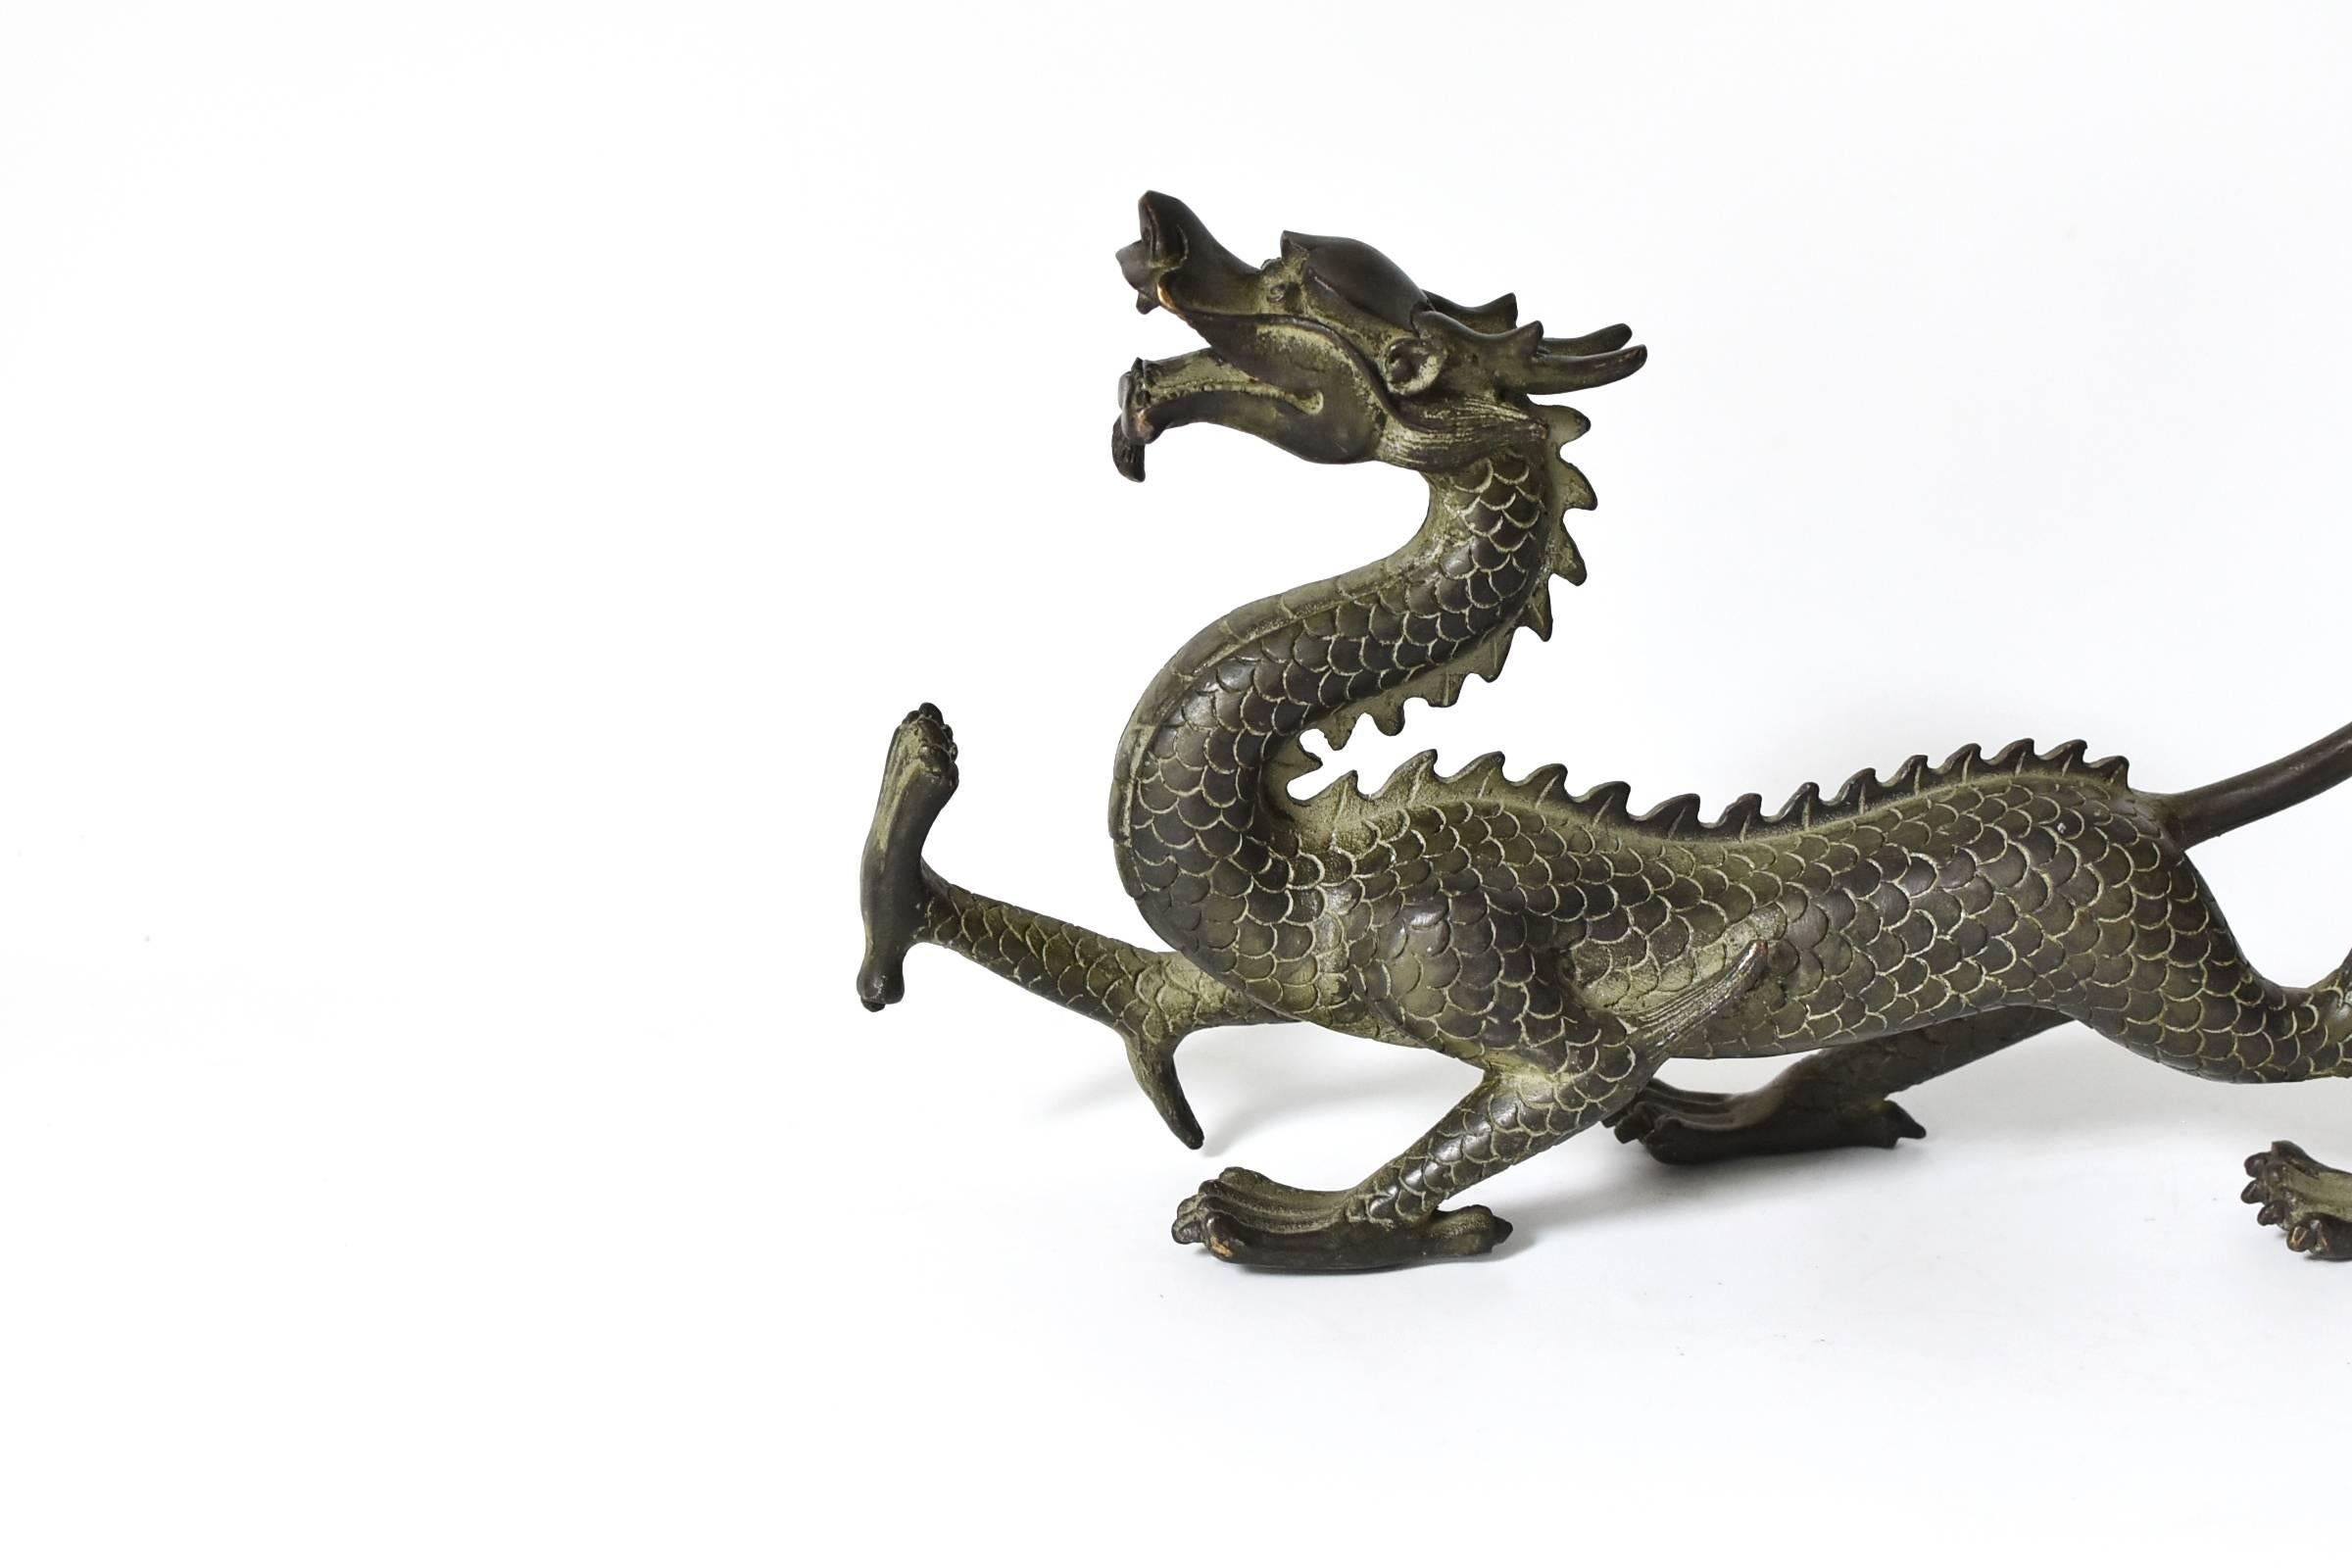 The dragon is the most important symbol in Chinese culture. A sign used by the Emperors, it represents power, leadership and prosperity. This wonderful sculpture captures the dragon in motion. Fine details of scale, paws and horns reflect the